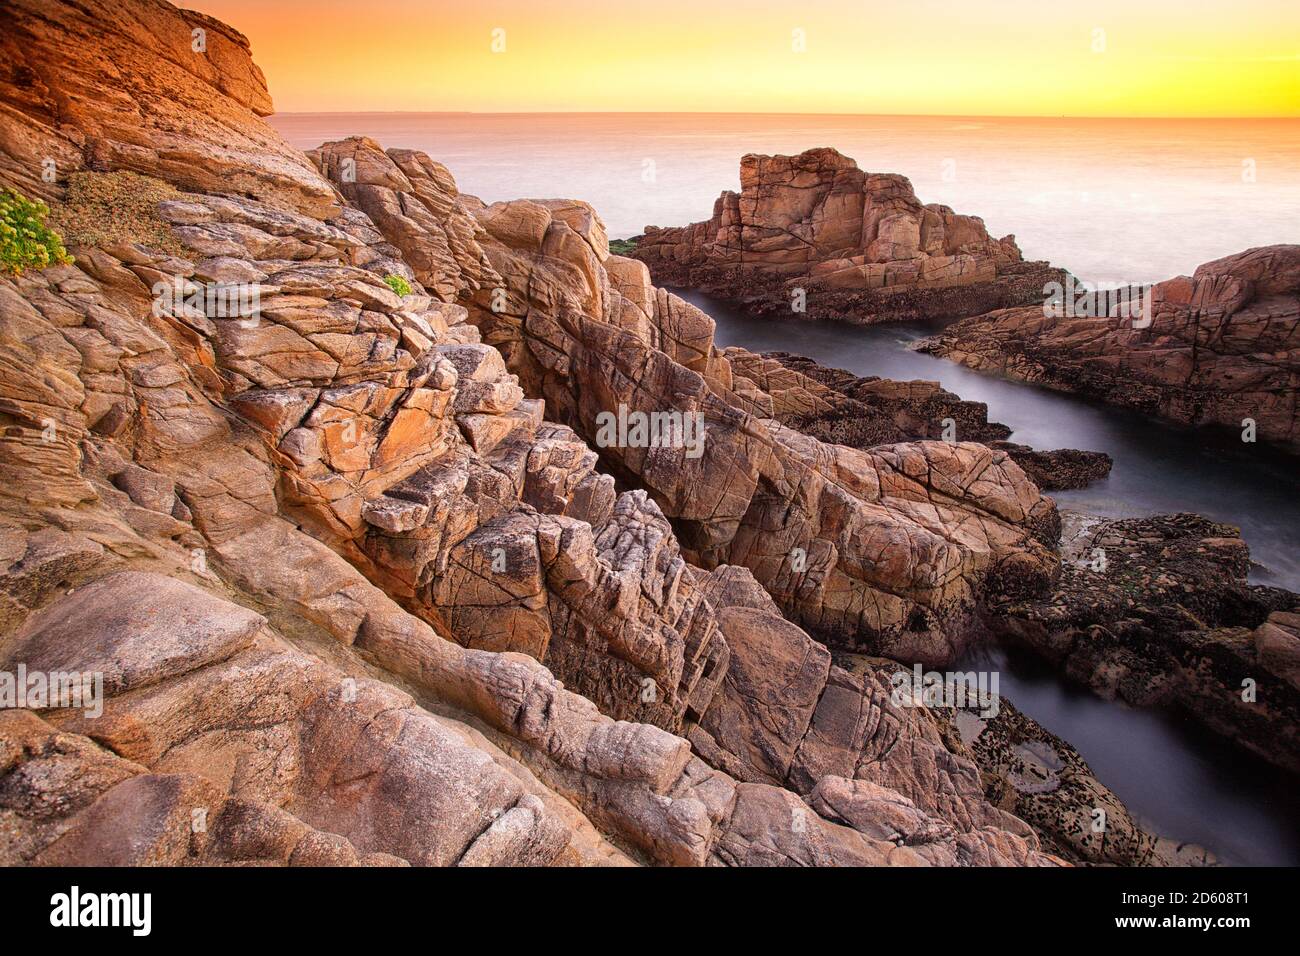 France, Brittany, Cote Sauvage at Qiberon peninsula in evening light Stock Photo